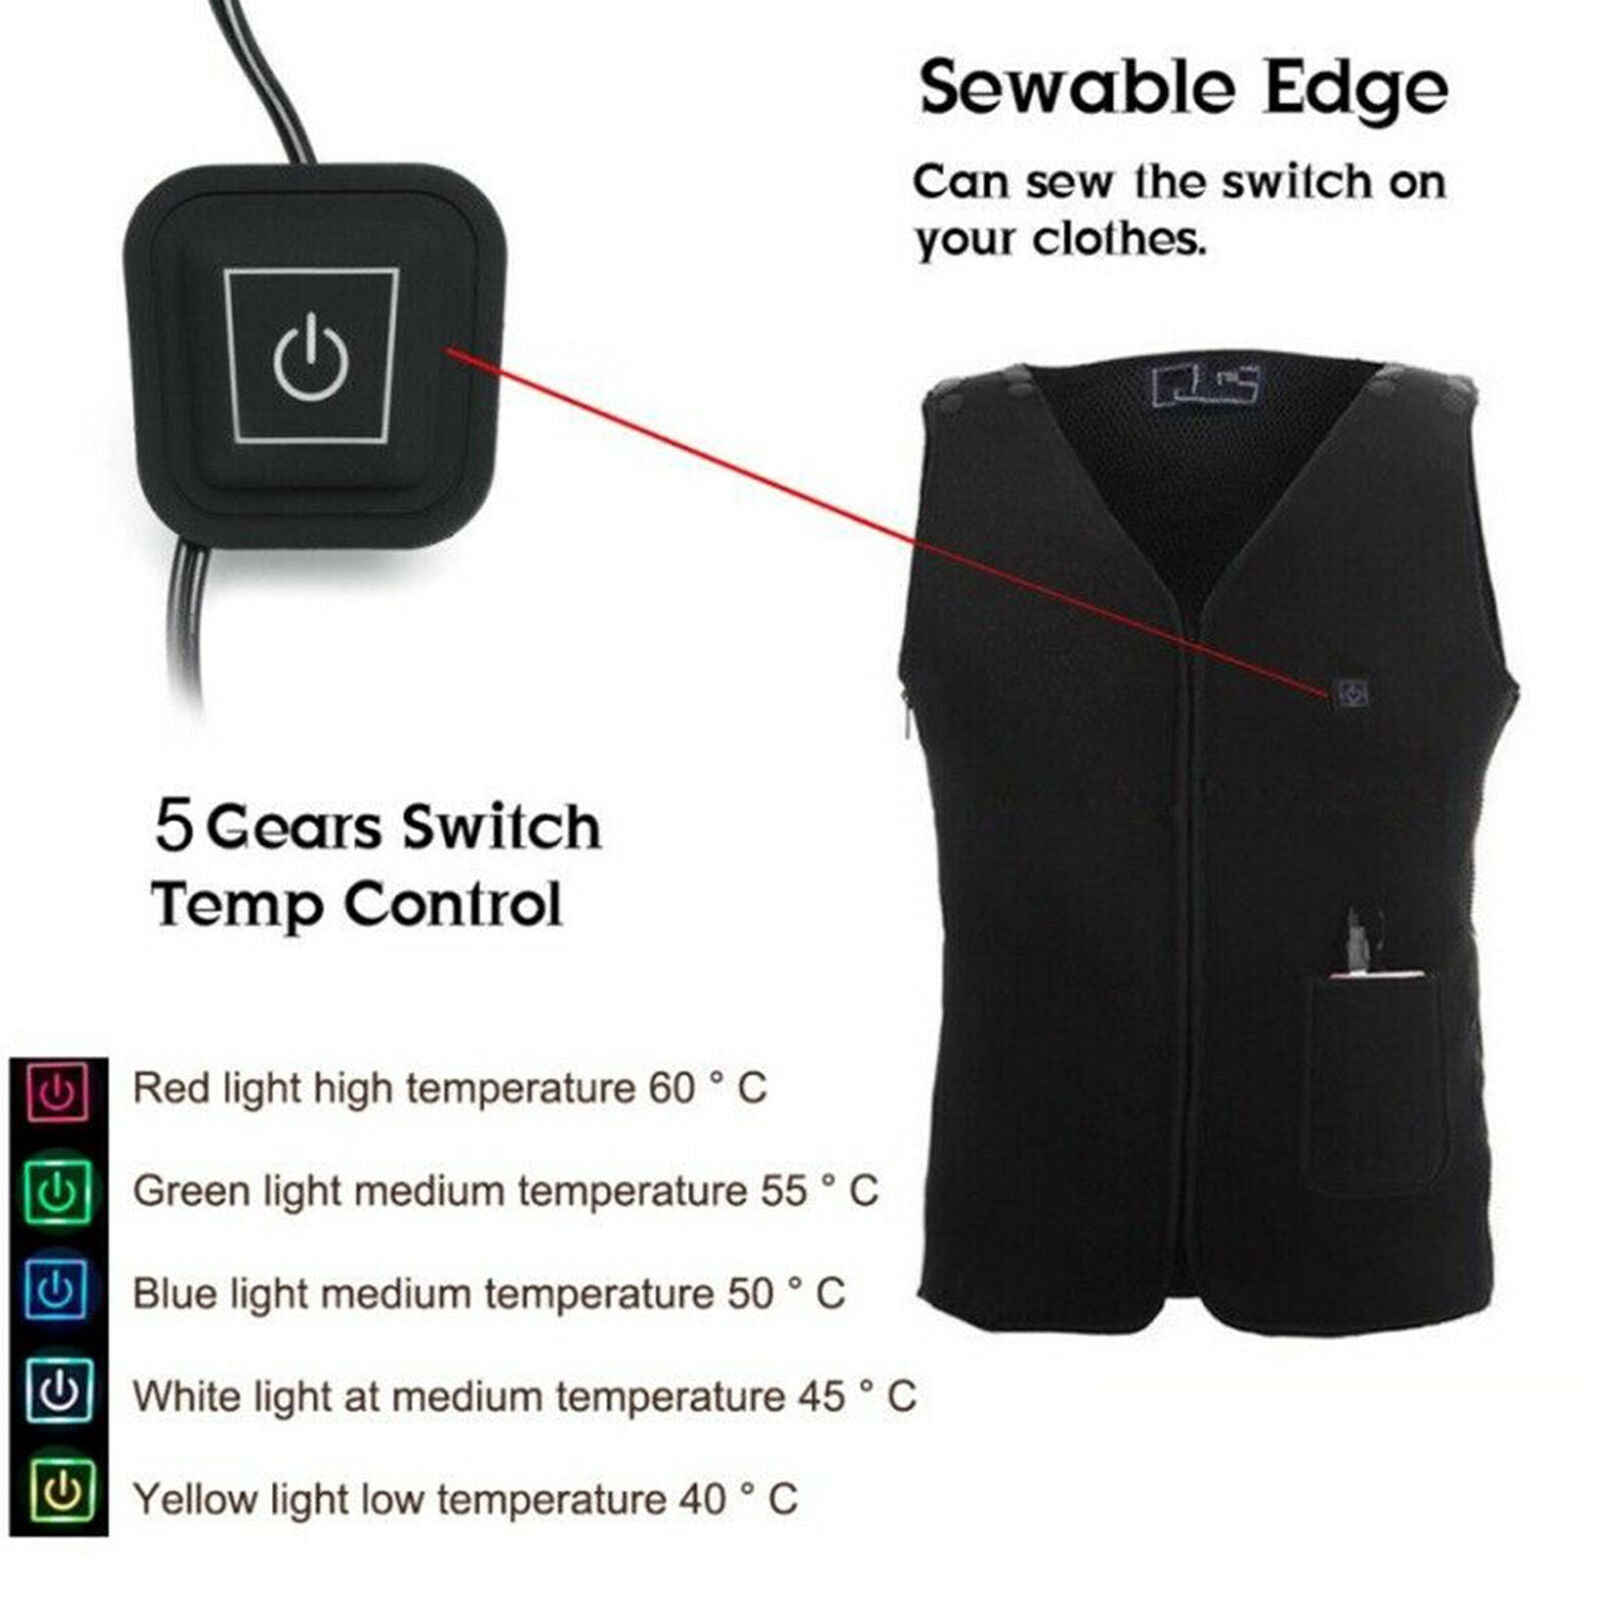 8-in-1 Electric Vest Heater Warm Cloth Jacket USB Thermal Heated Pad Body Warmer